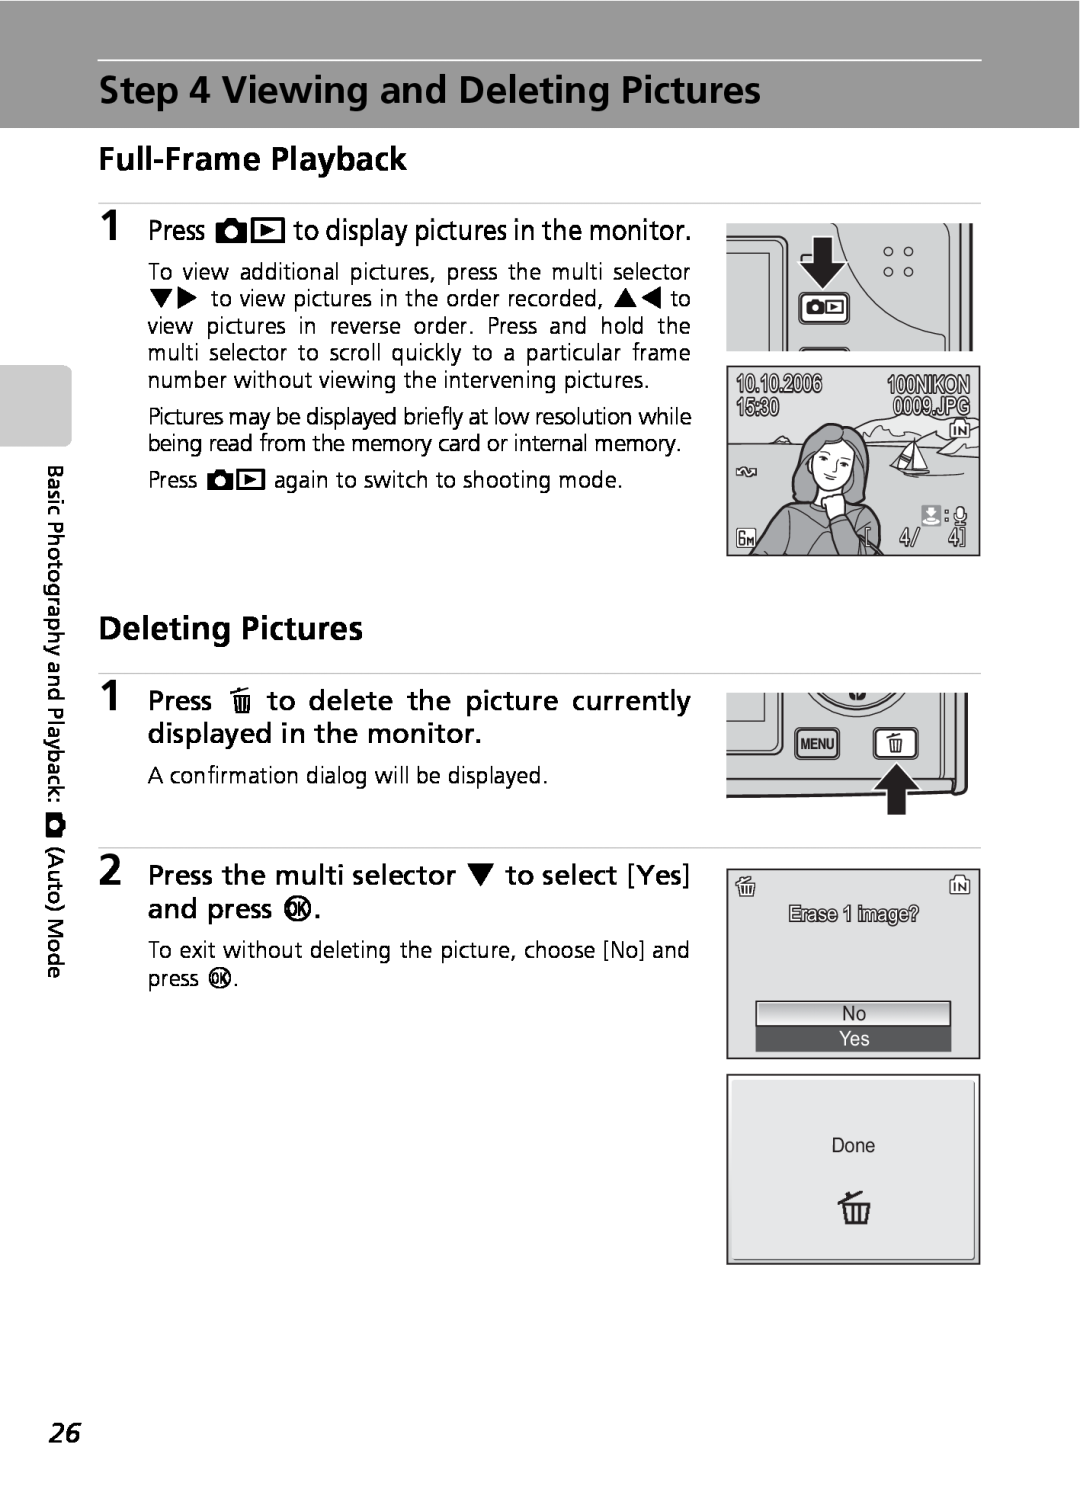 Nikon COOLPIXS9 manual Viewing and Deleting Pictures, Full-FramePlayback 